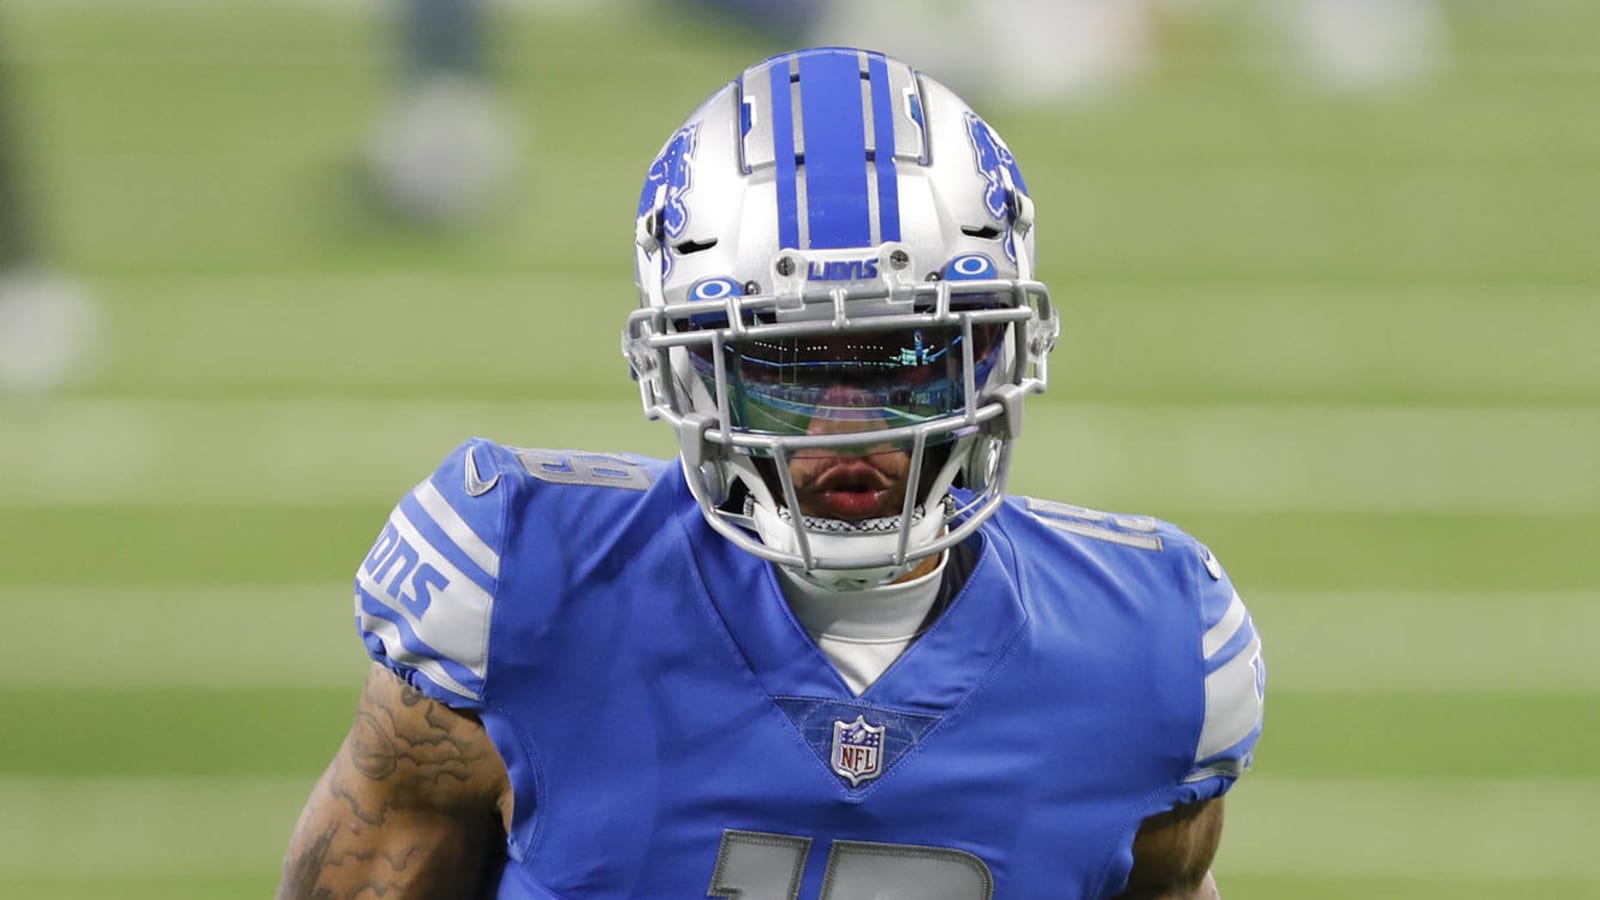 Lions wide receiver Kenny Golladay suffers hip injury vs. Colts